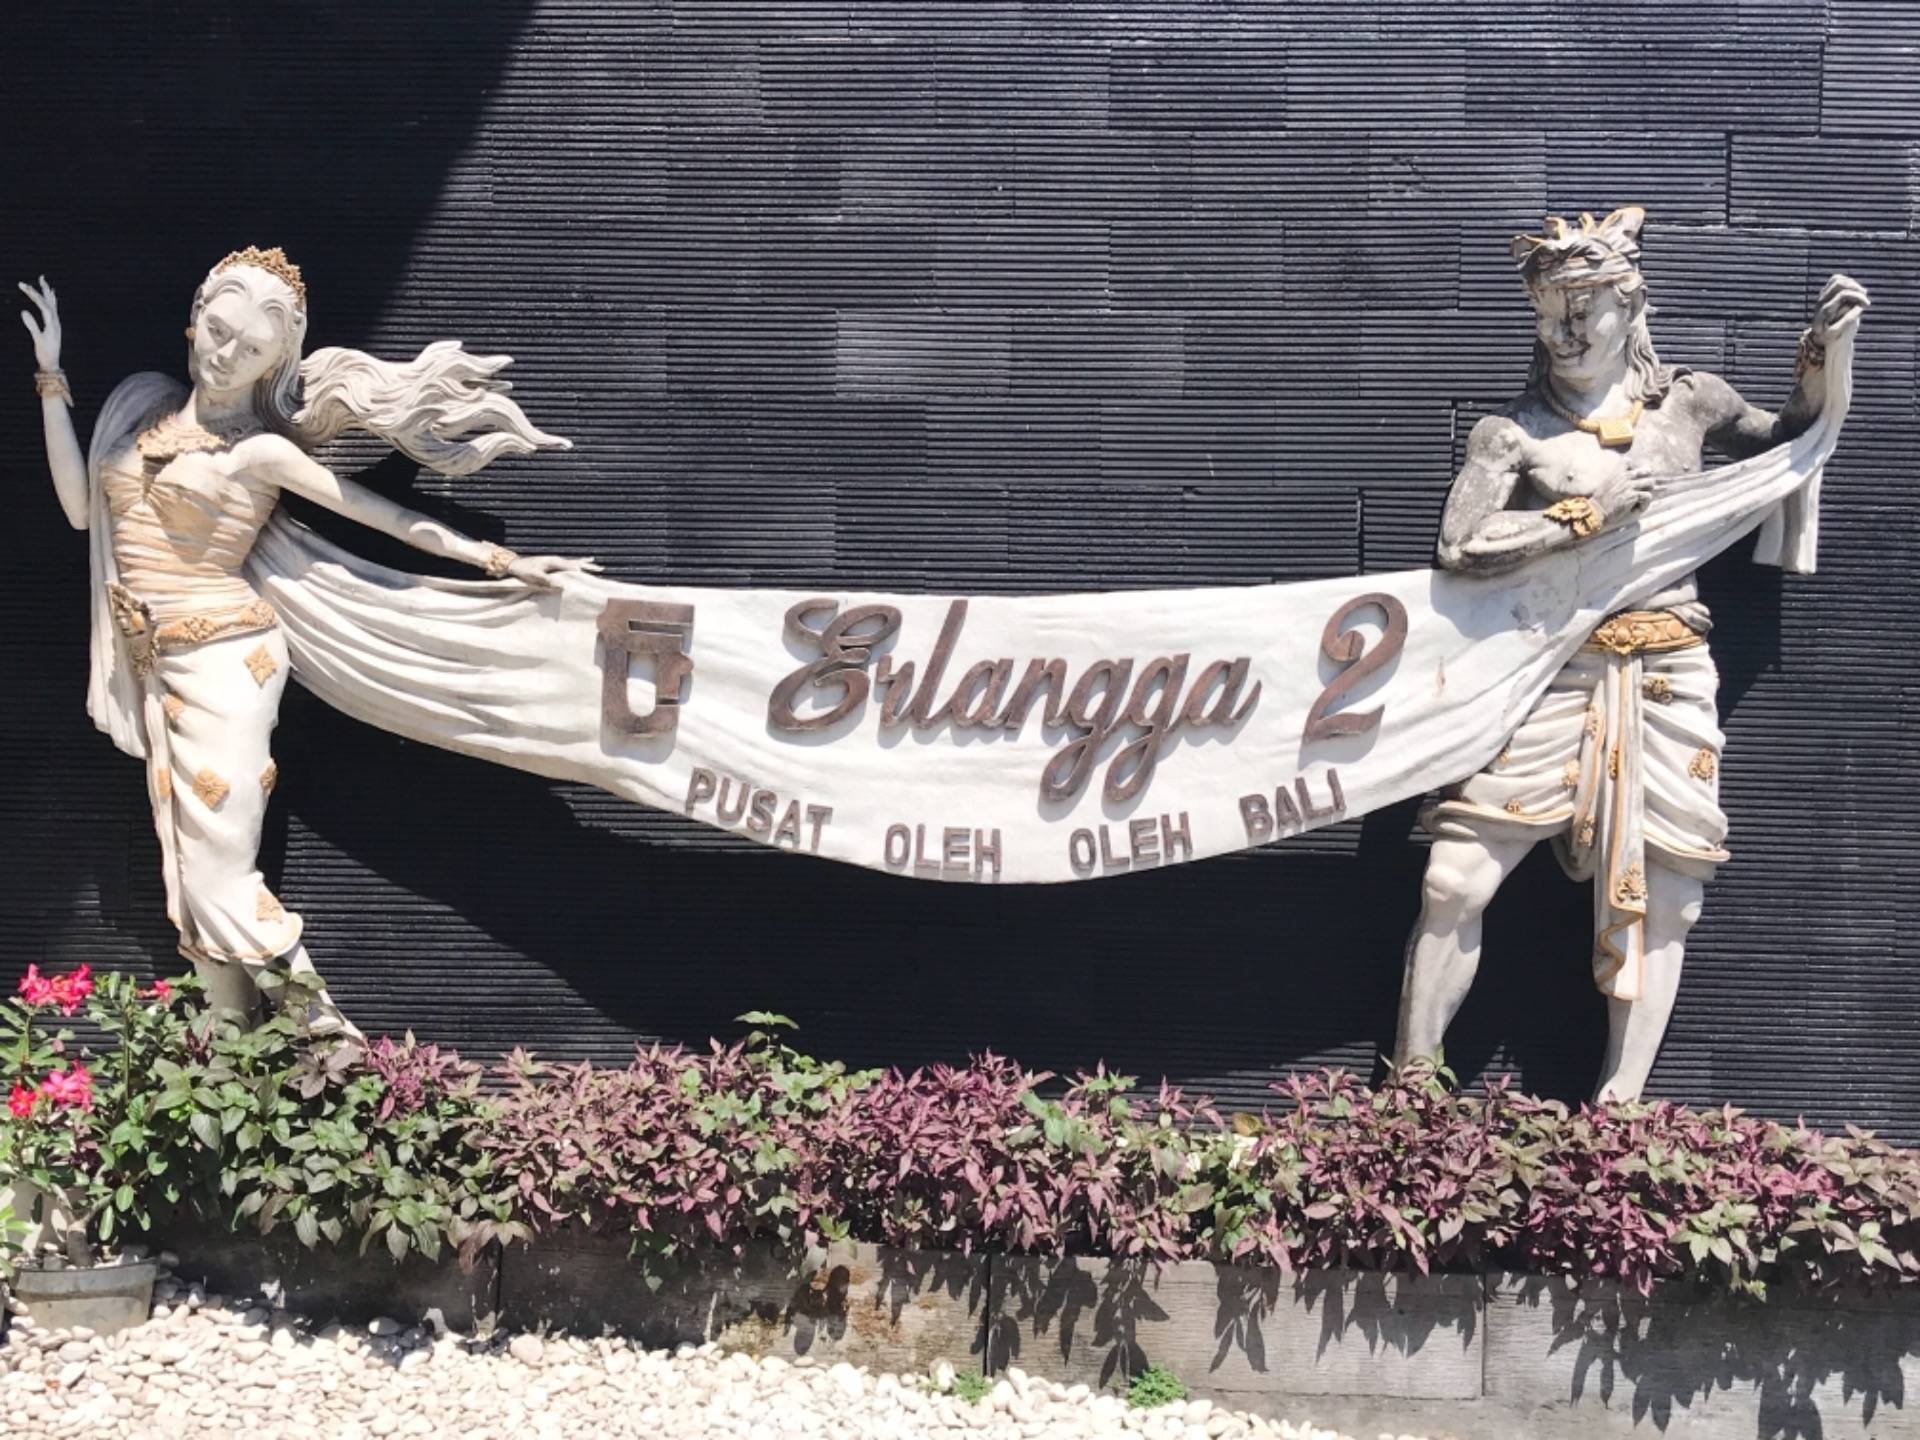 Erlangga, One of The Best Souvenir Stores in Bali